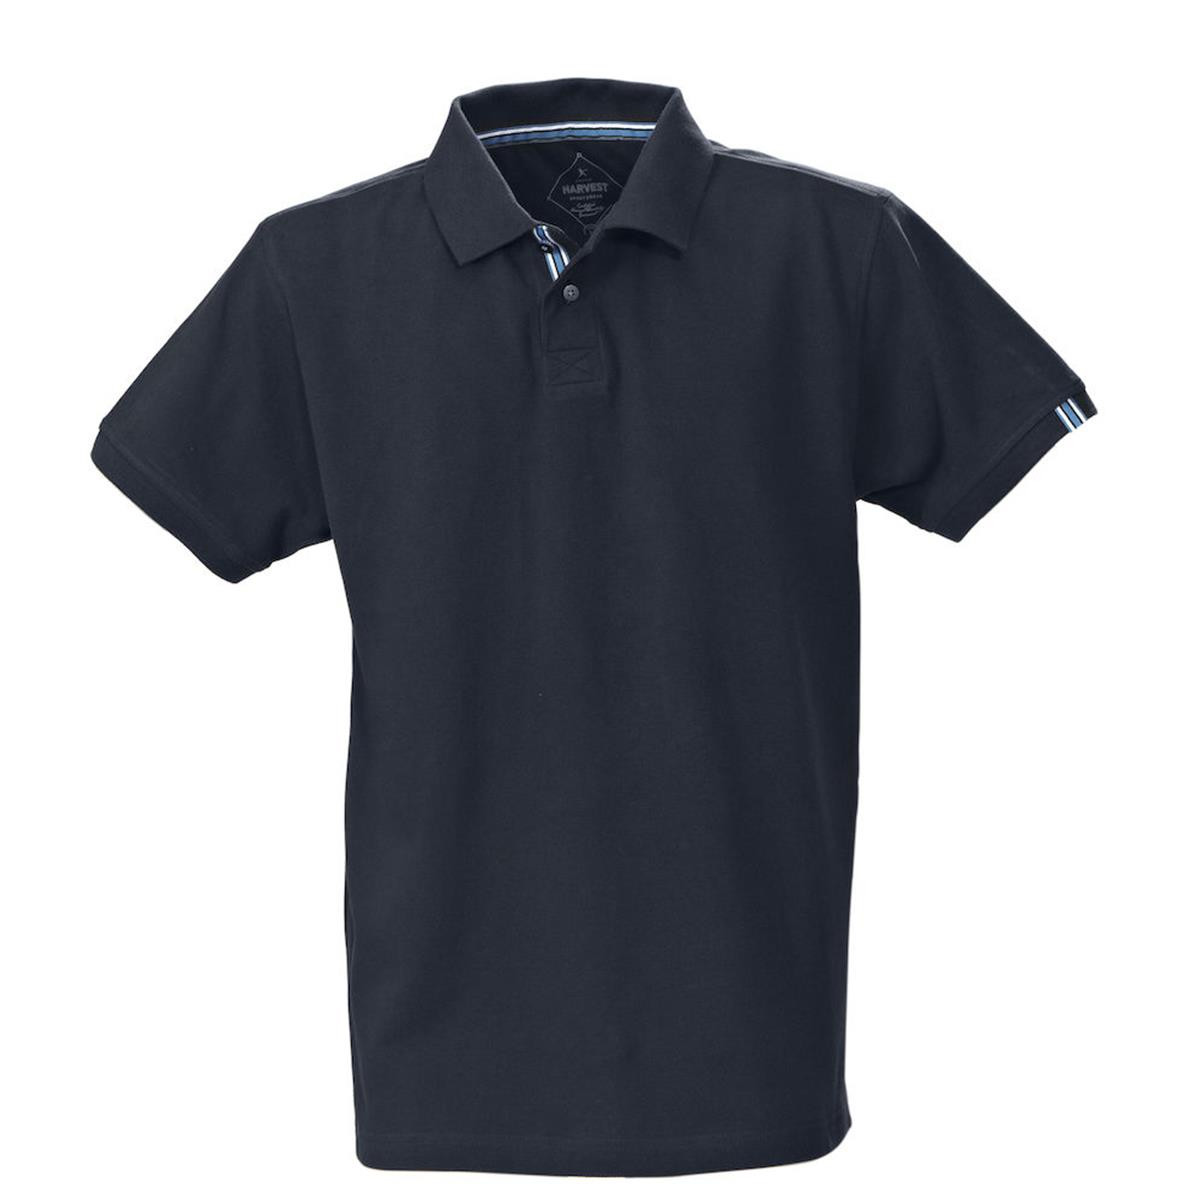 Promotional Antreville Combed Cotton Polo Shirts | James Harvest Polos